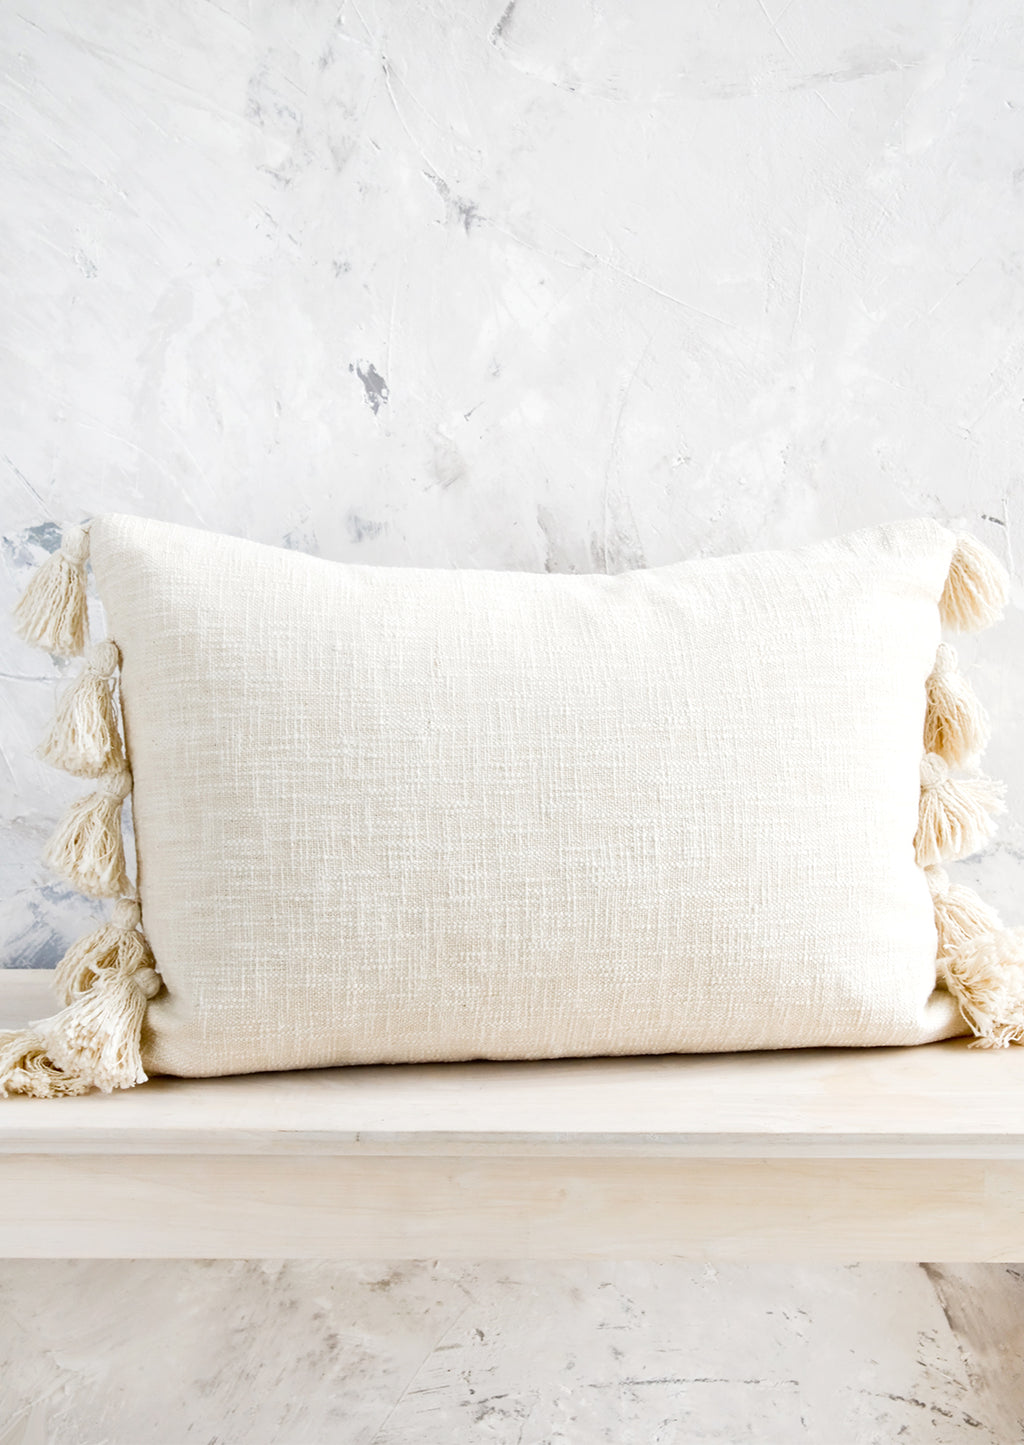 1: Lumbar throw pillow in textured, cream colored cotton with large decorative tassels at sides.